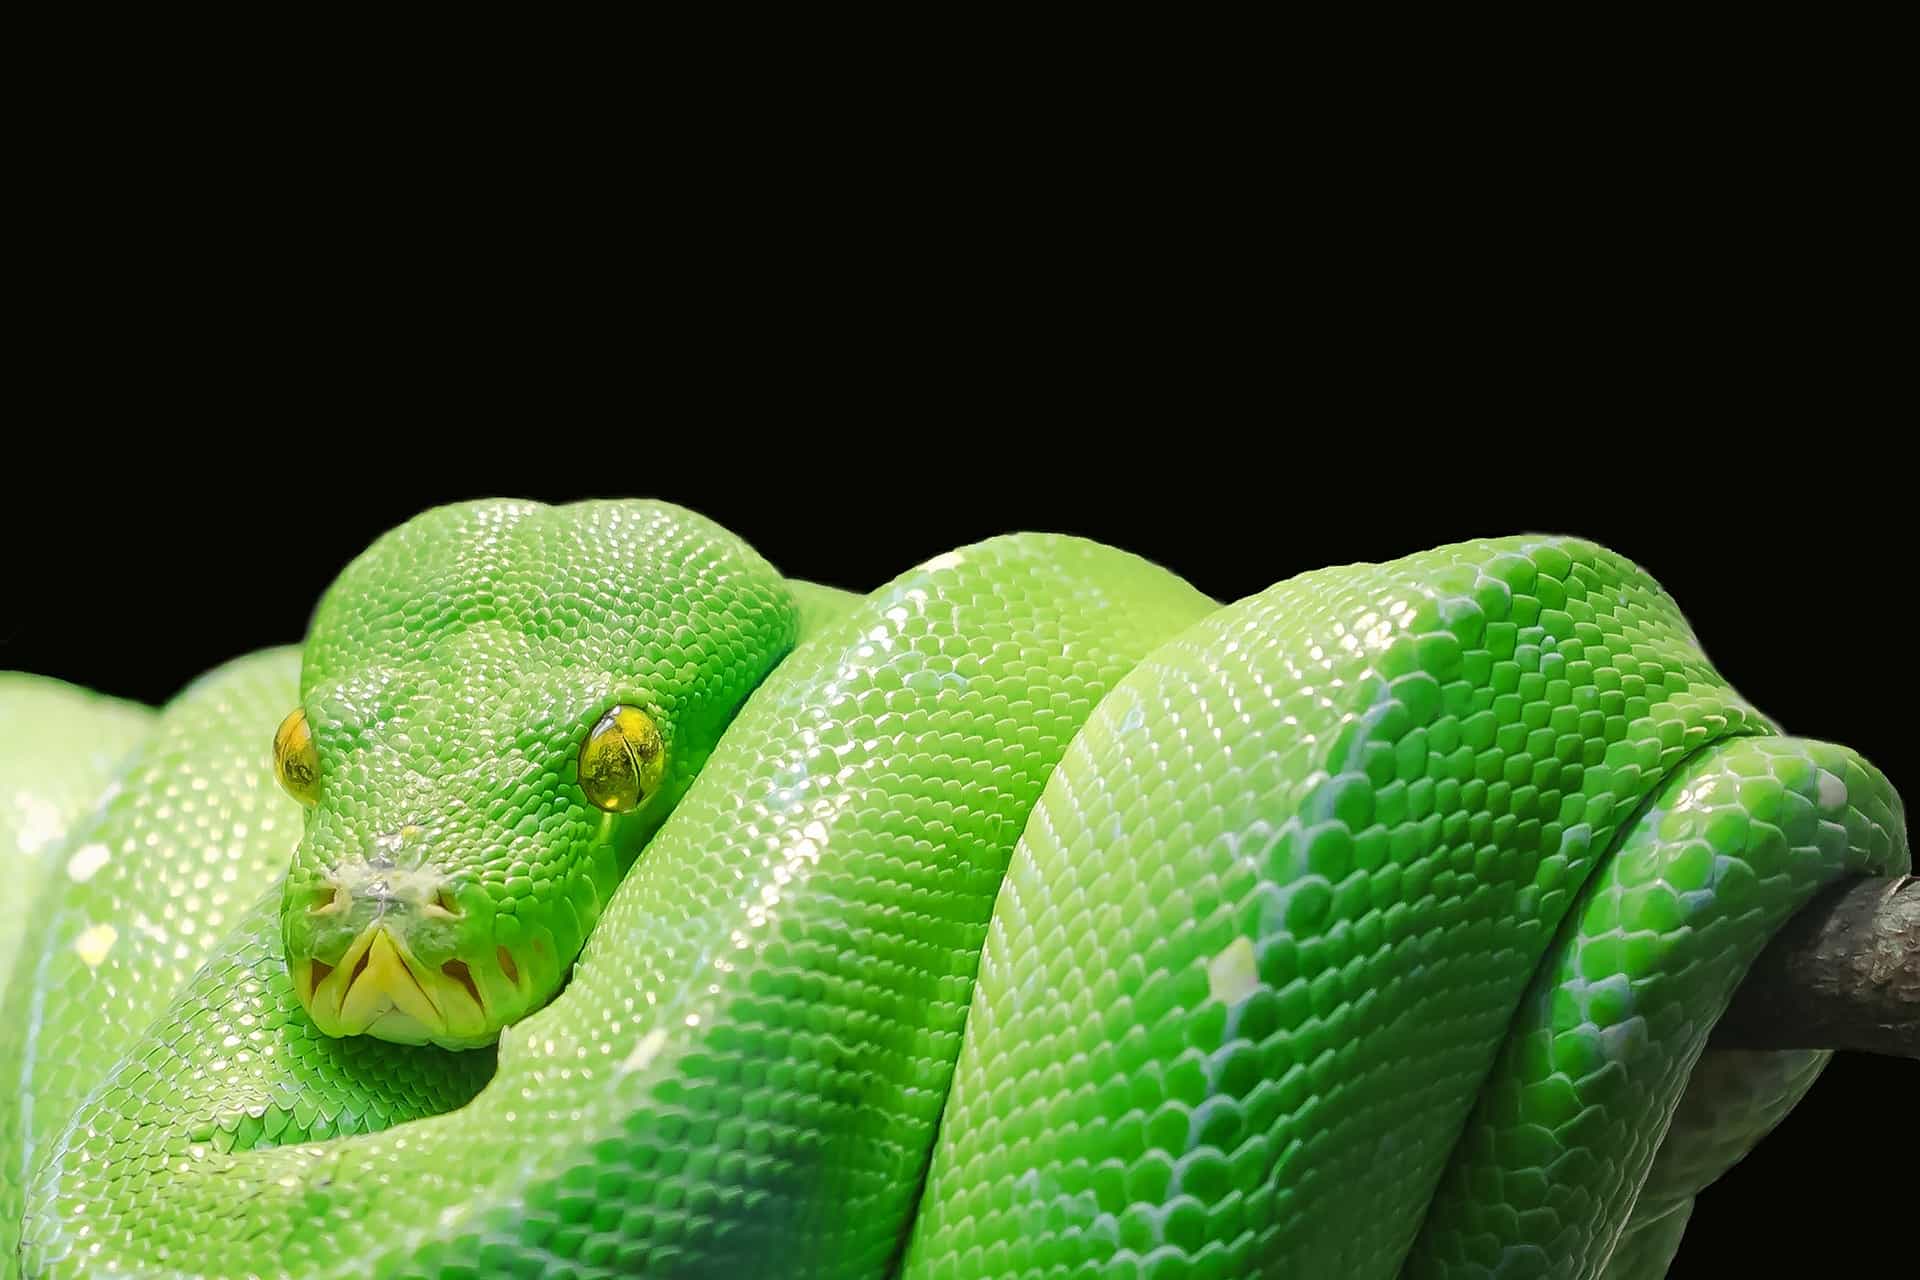 Snakes: 101 Super Fun Facts And Amazing Pictures (Featuring The